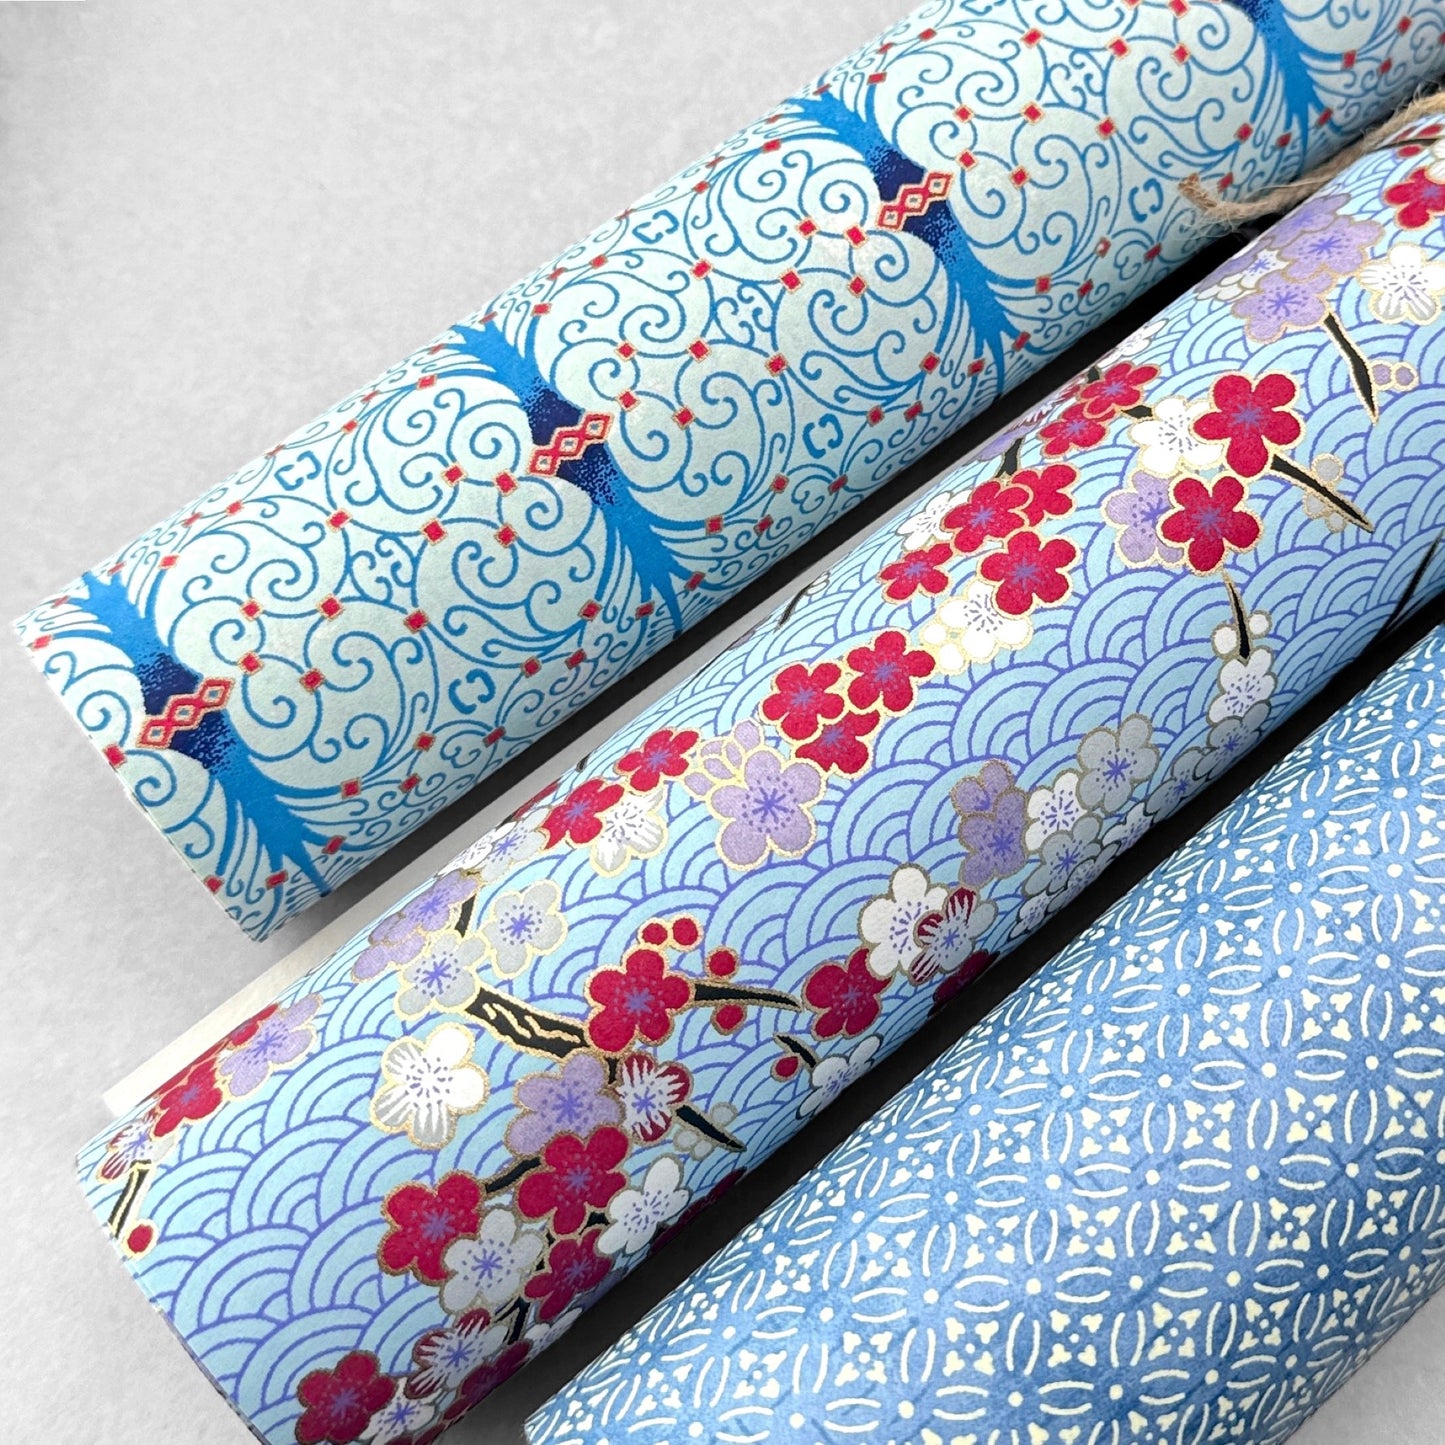 Japanese silkscreen chiyogami paper with a pattern of deep red, lilac and white plum blossom on a blue backdrop, rolled and alongside other designs